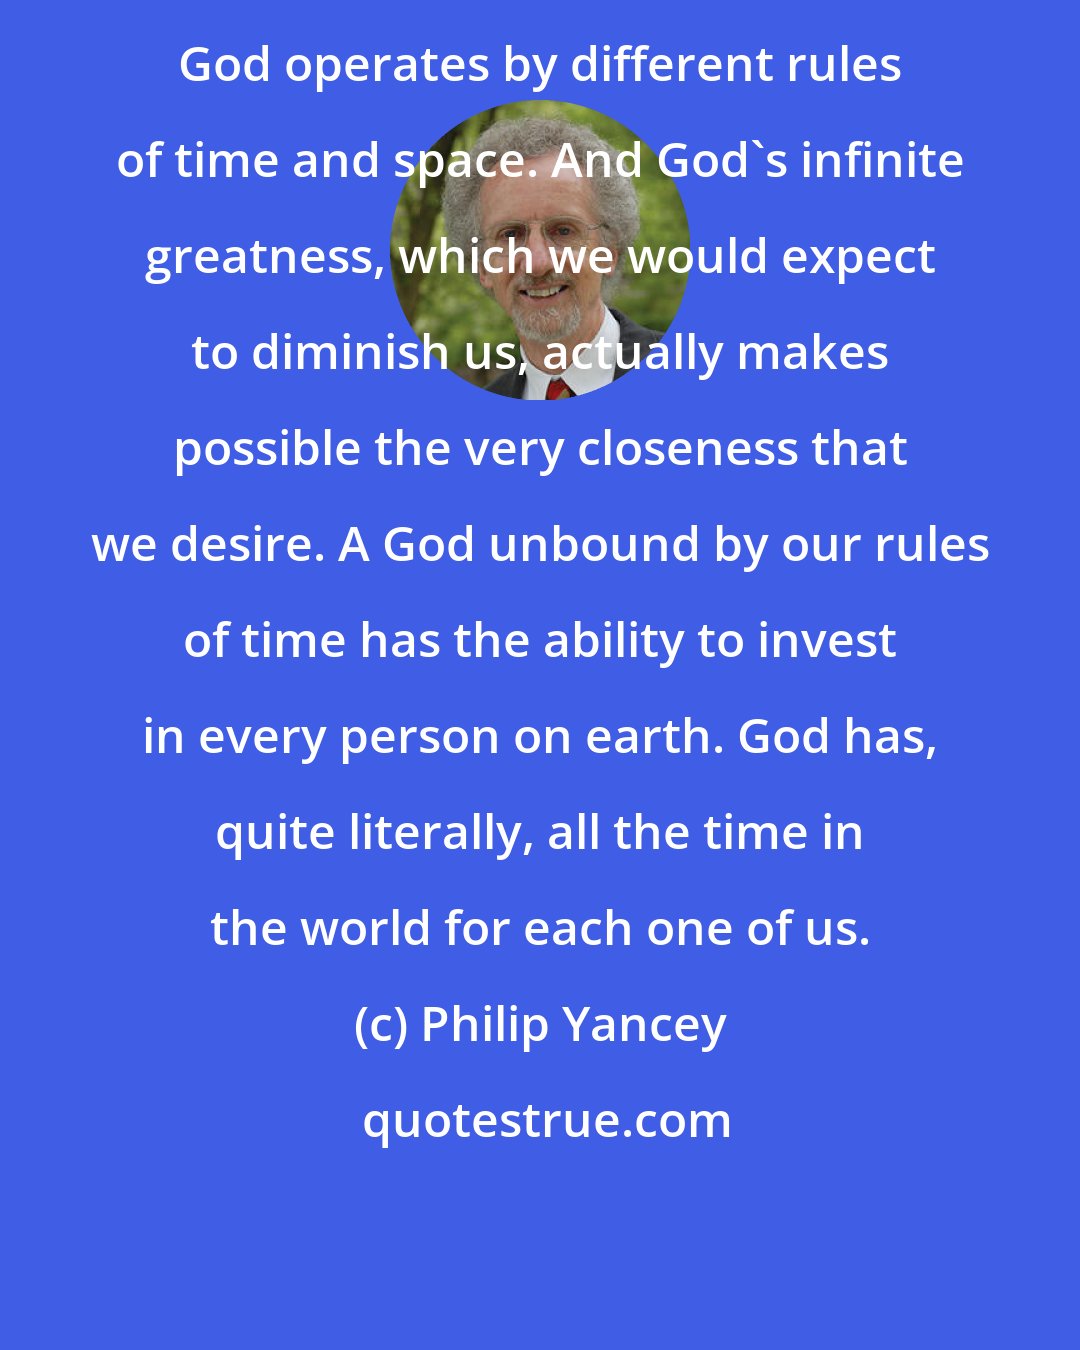 Philip Yancey: God operates by different rules of time and space. And God's infinite greatness, which we would expect to diminish us, actually makes possible the very closeness that we desire. A God unbound by our rules of time has the ability to invest in every person on earth. God has, quite literally, all the time in the world for each one of us.